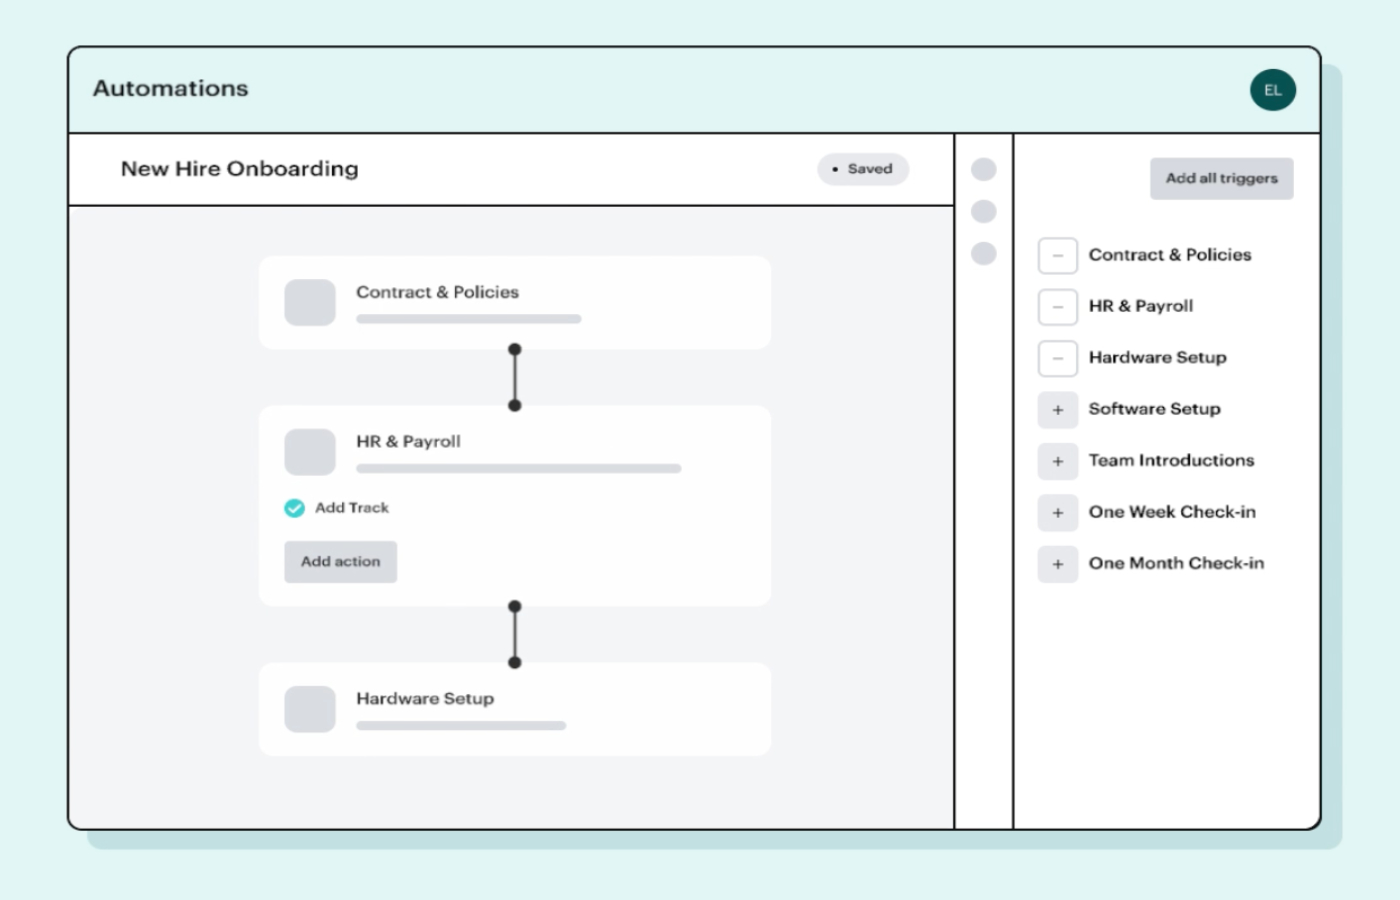 Example of a workflow for onboarding new employees.